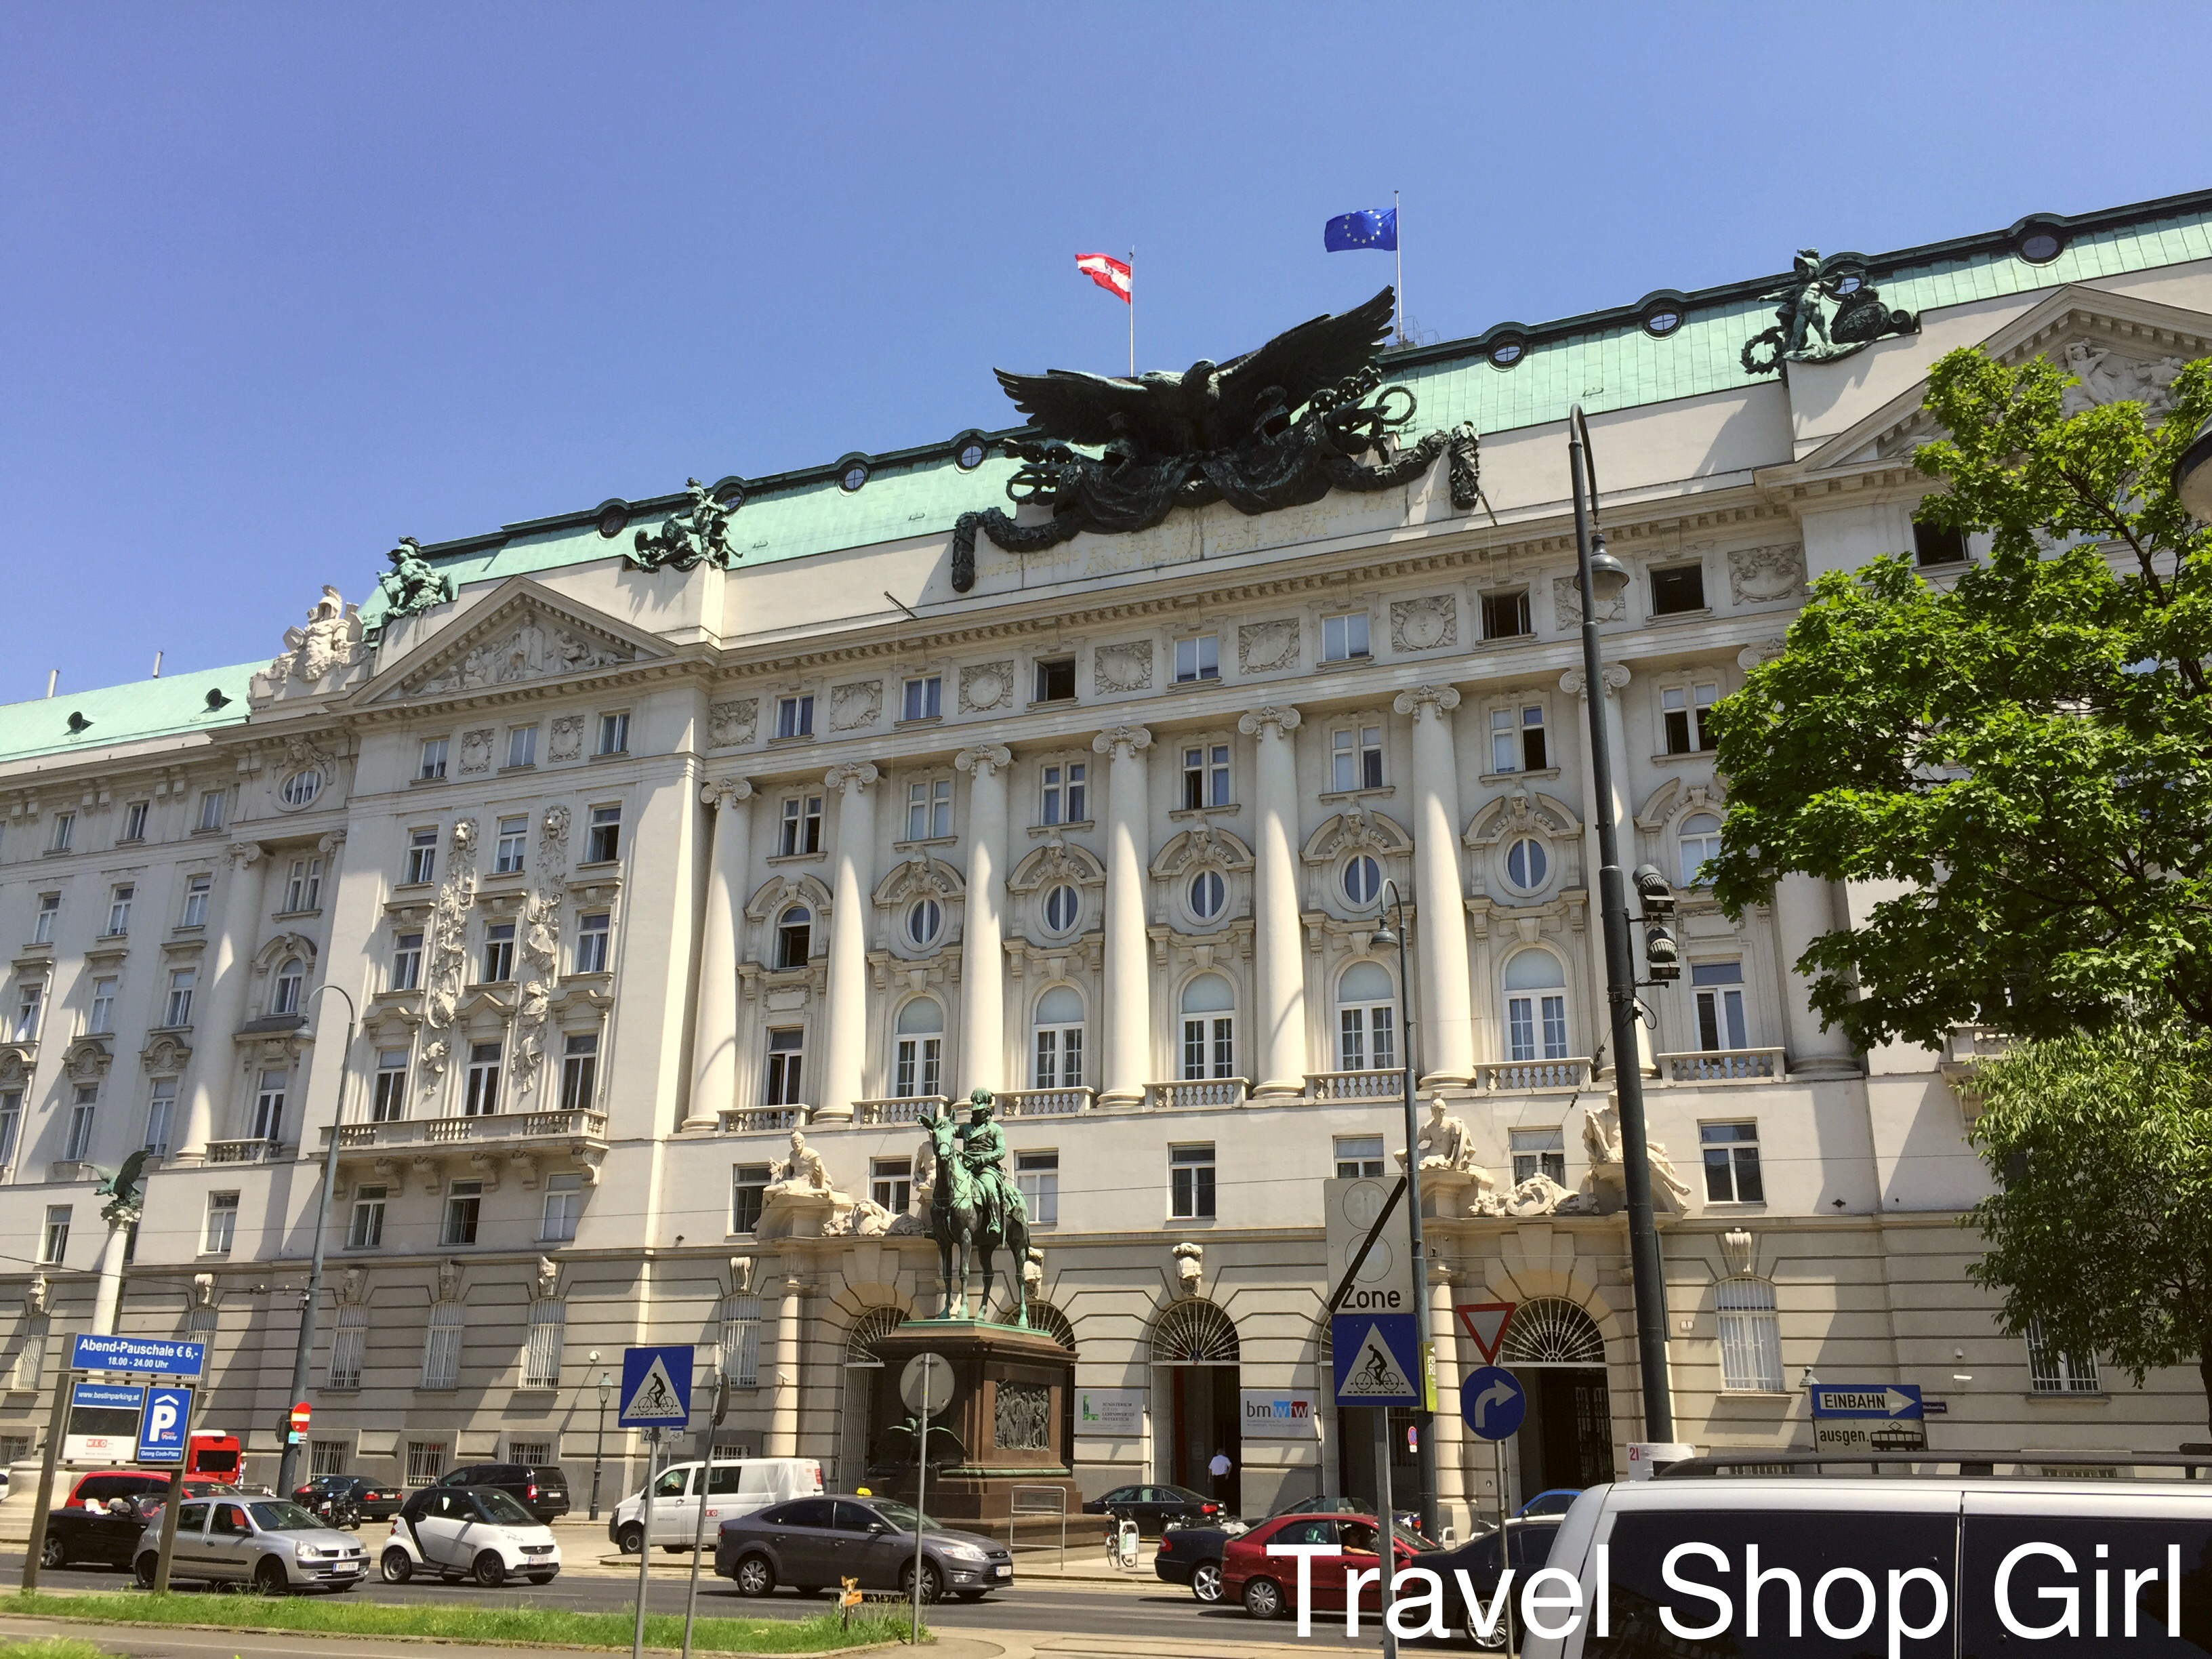 A Day of Sightseeing in Vienna